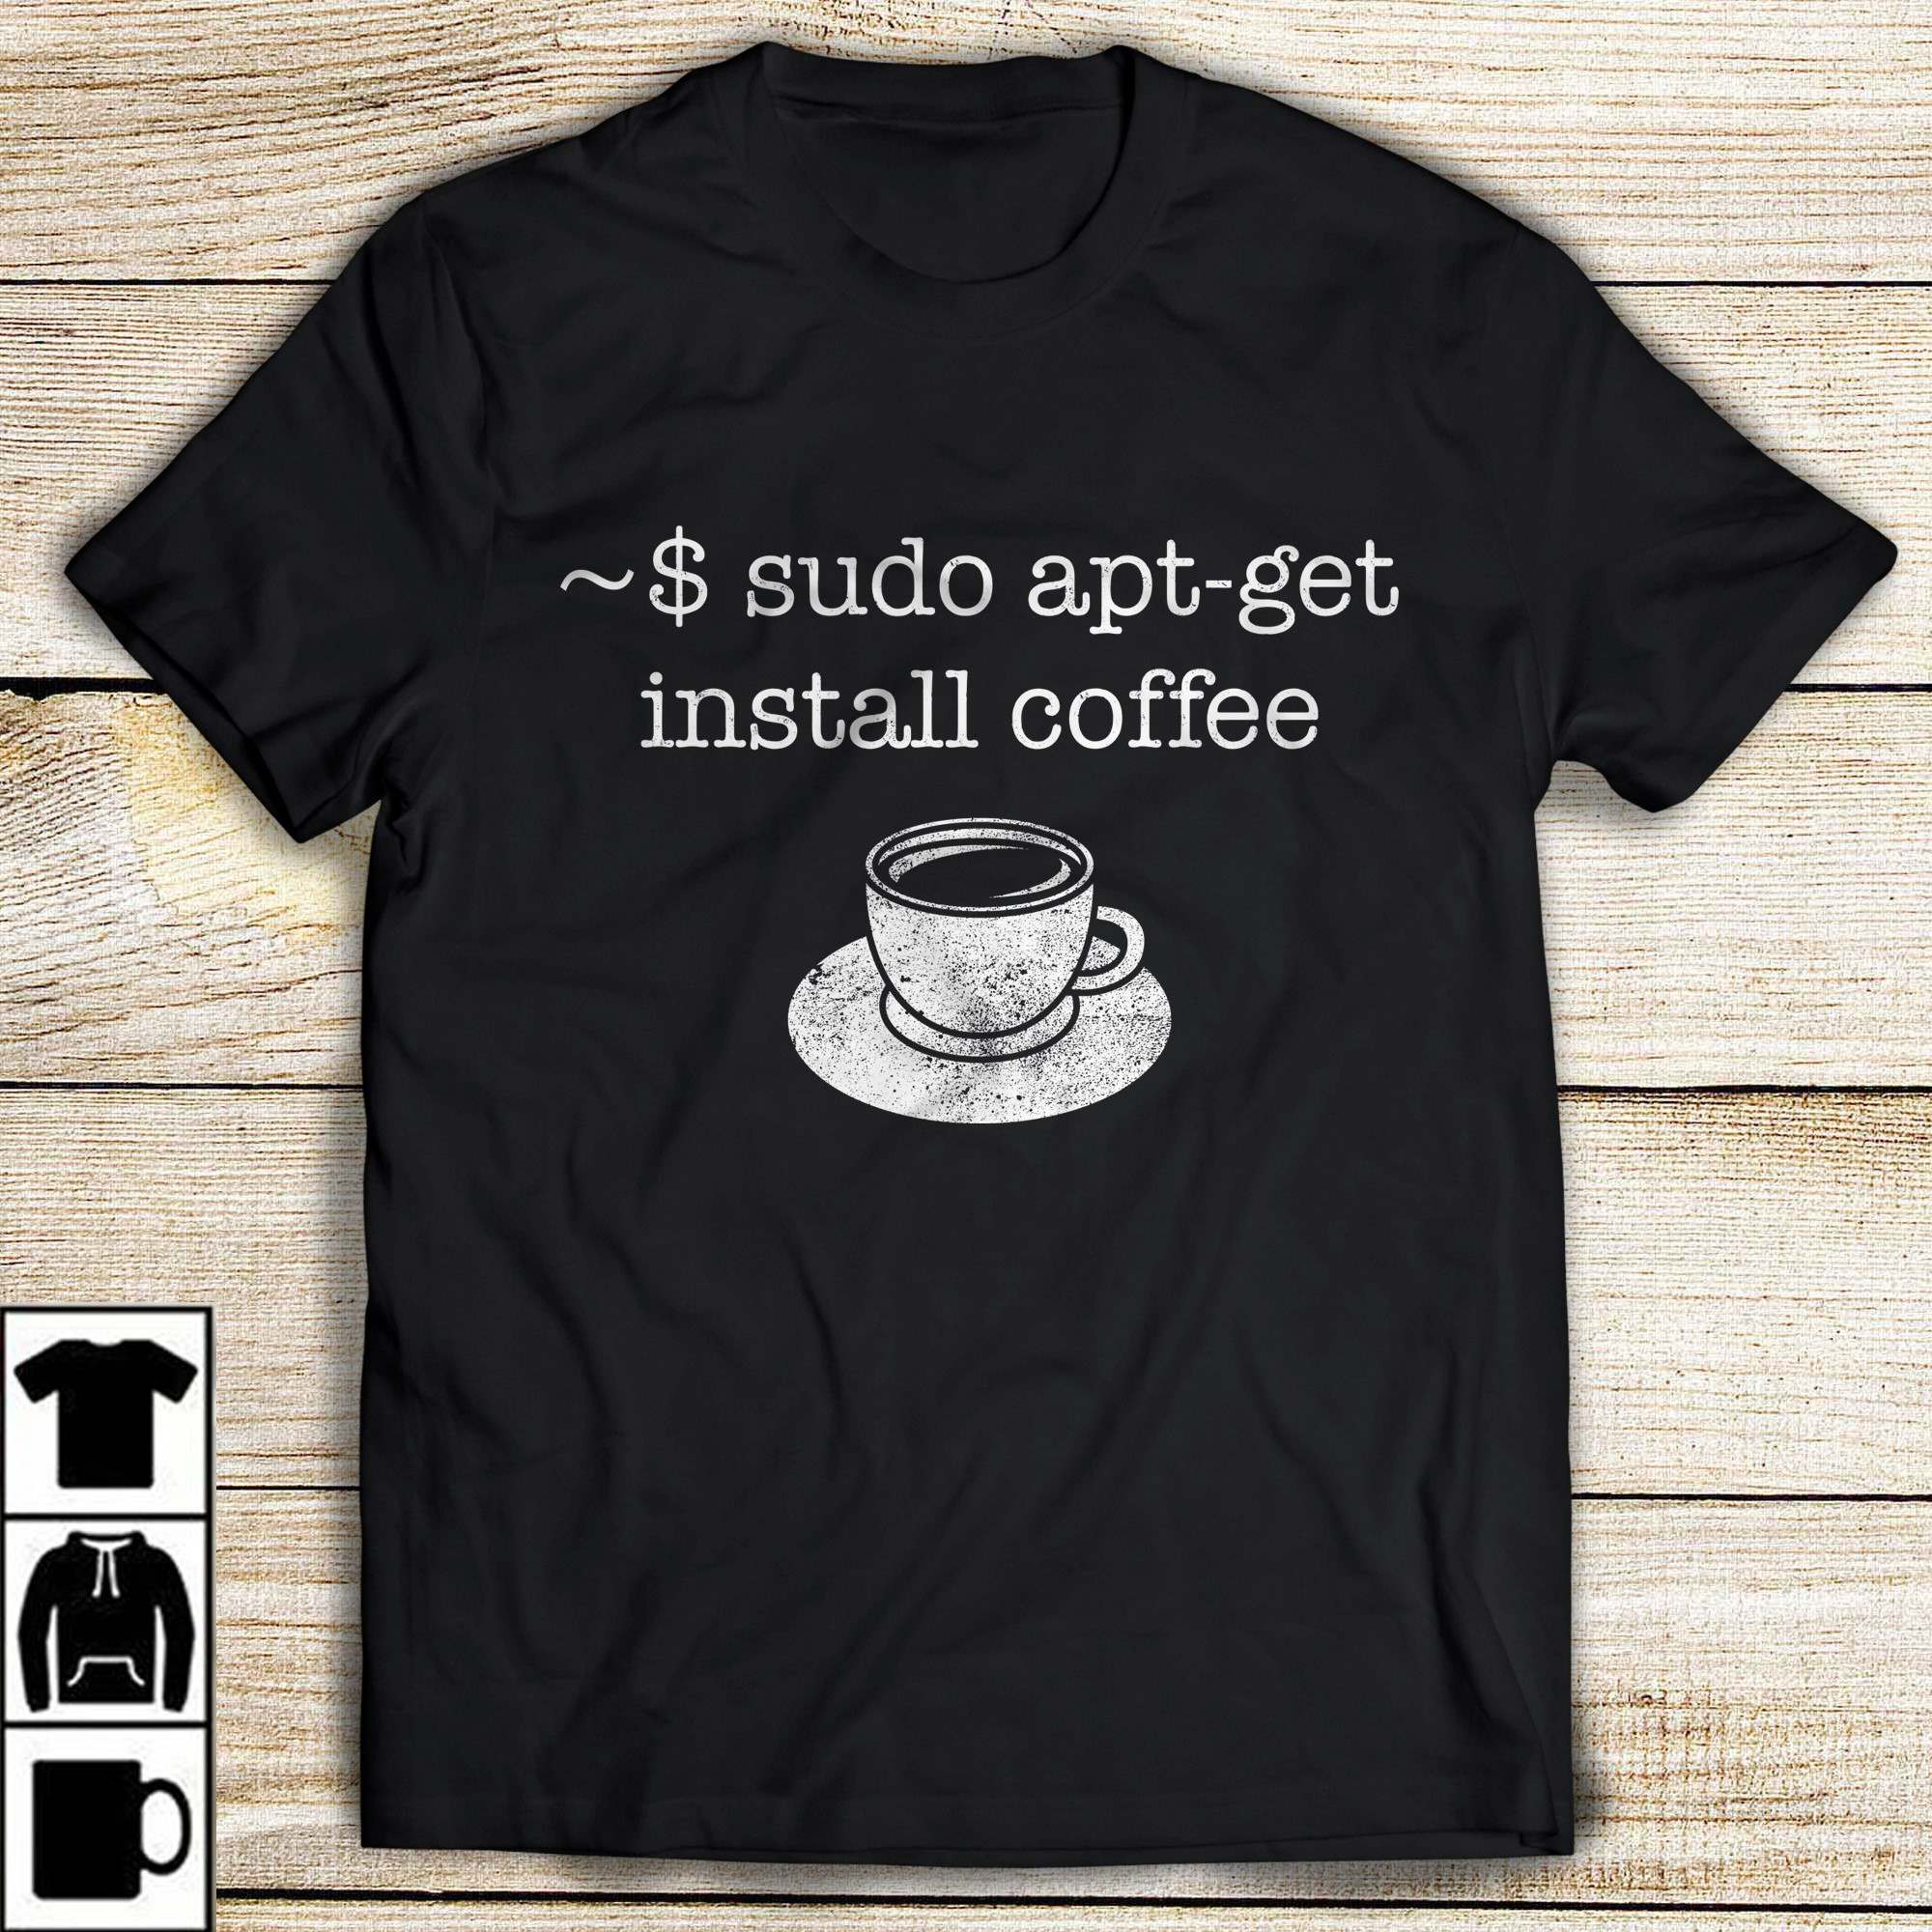 ~$ sudo apt-get install coffee - cup of coffee, coffee lover